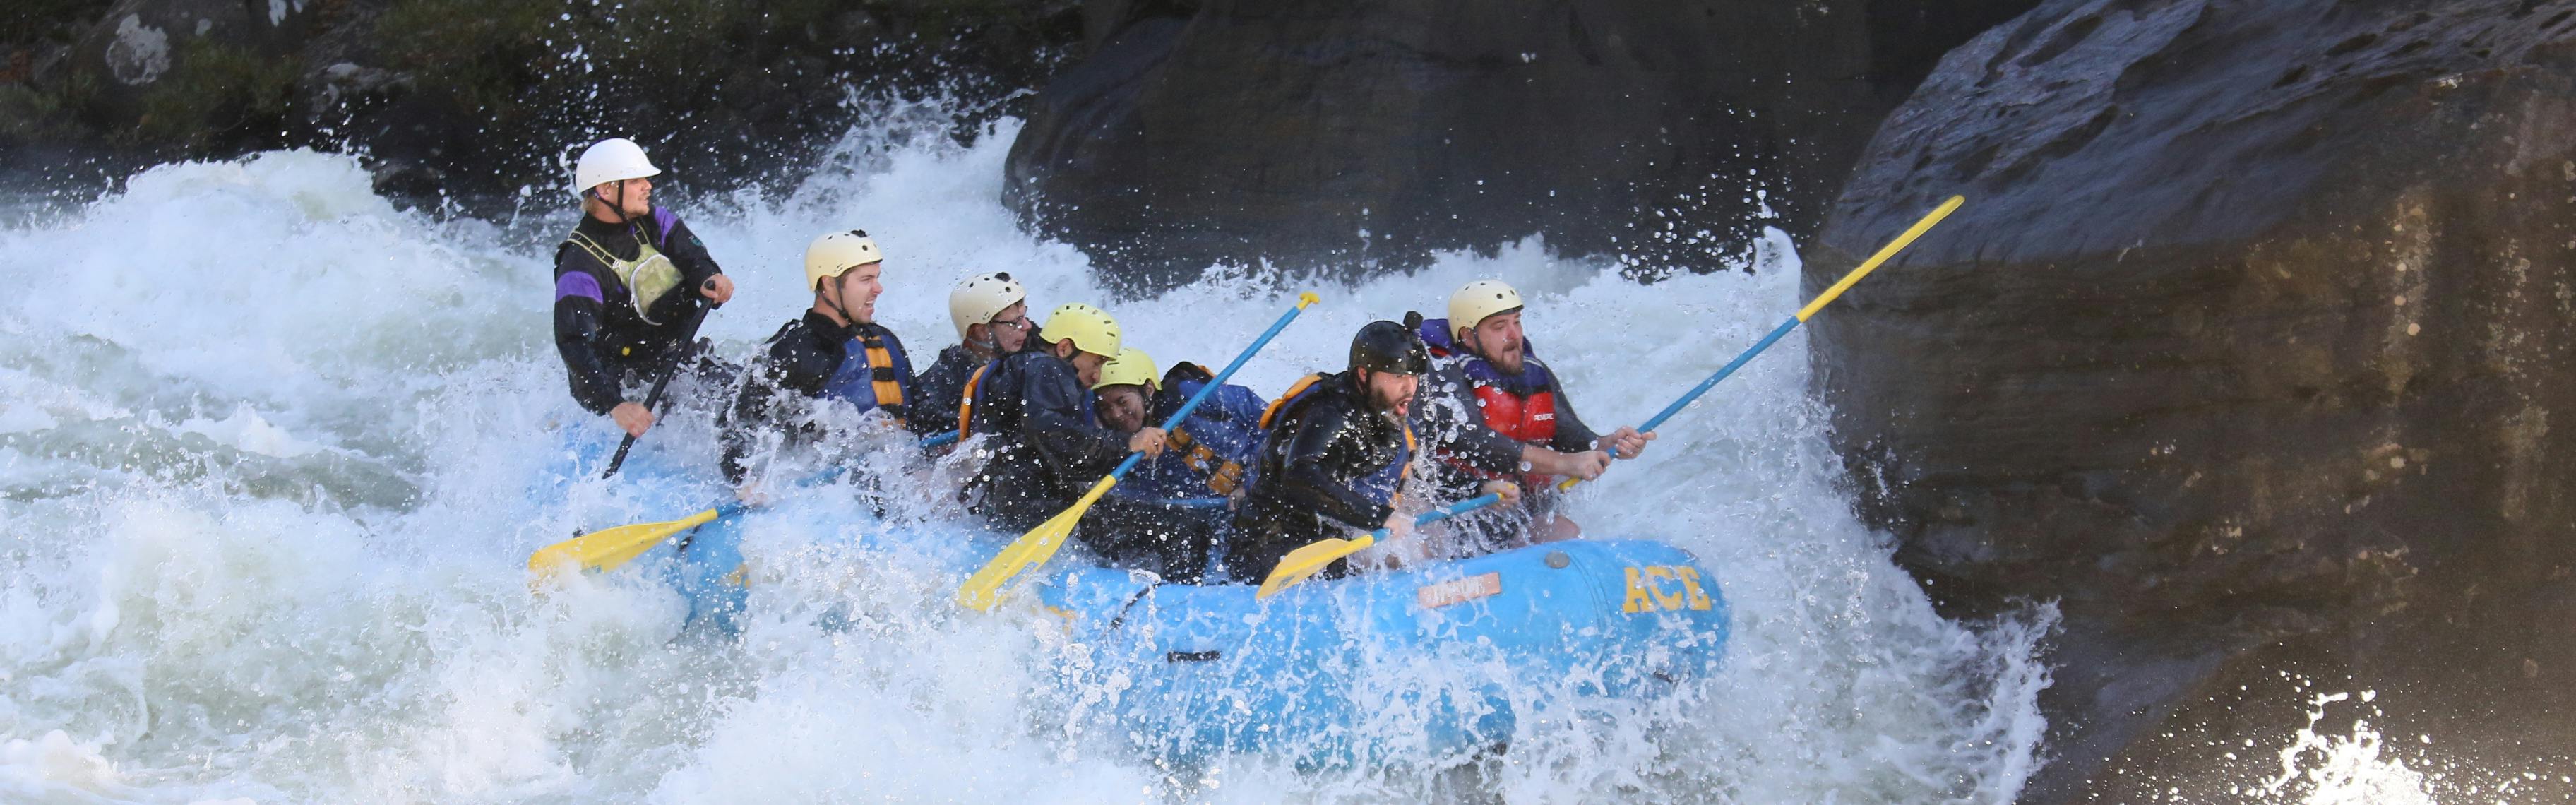 A group of whitewater rafters